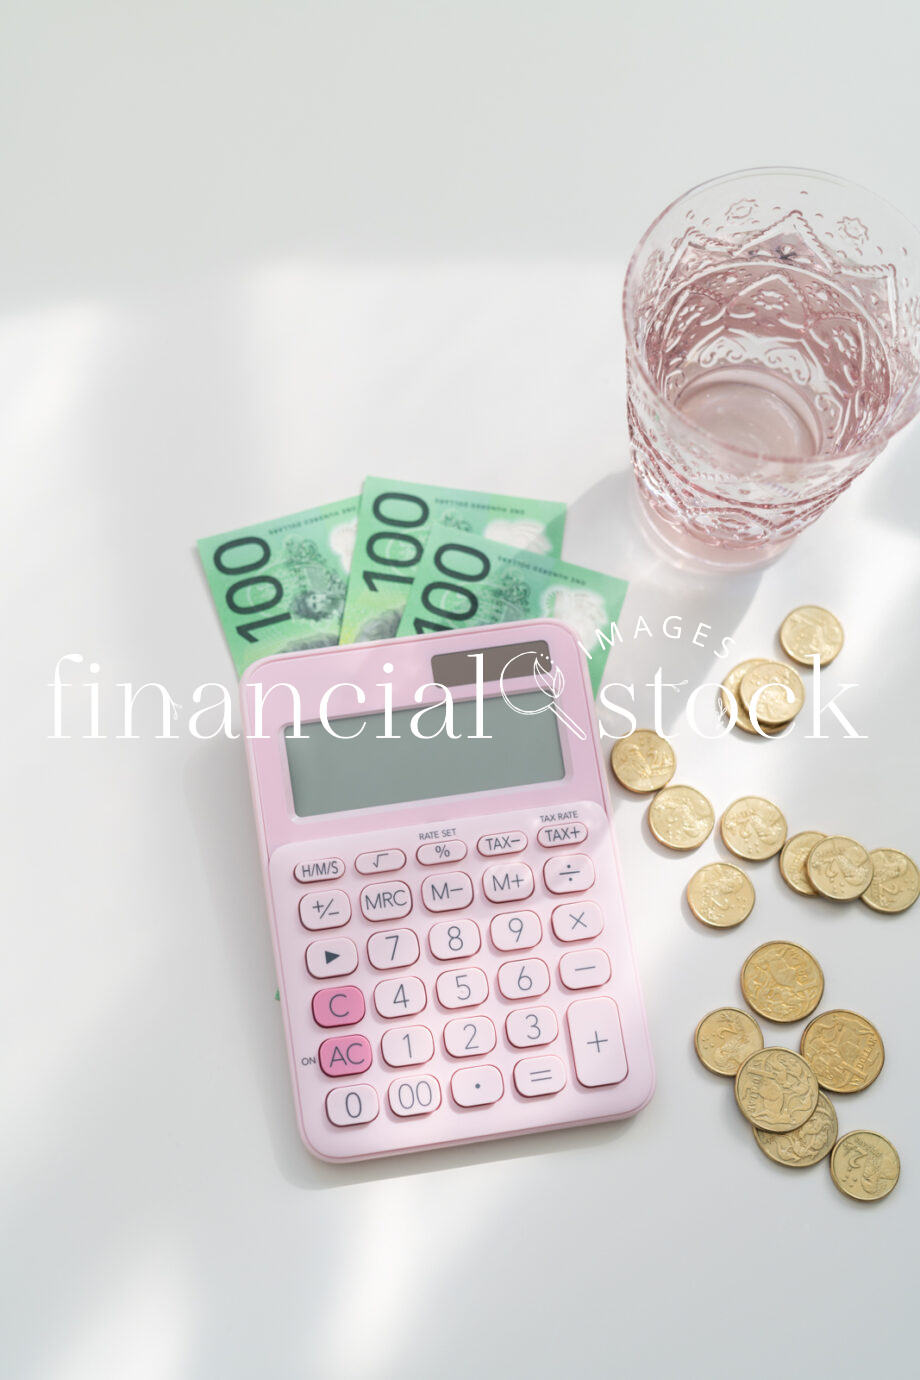 Australian, Australia, Pink, Feminine, Financial, Finance, Calculator, Money, Coins, Notes, 100, Hundred, Dollar, Copyspace, Stock, Photo, Image, Images, Picture, Content, Creation